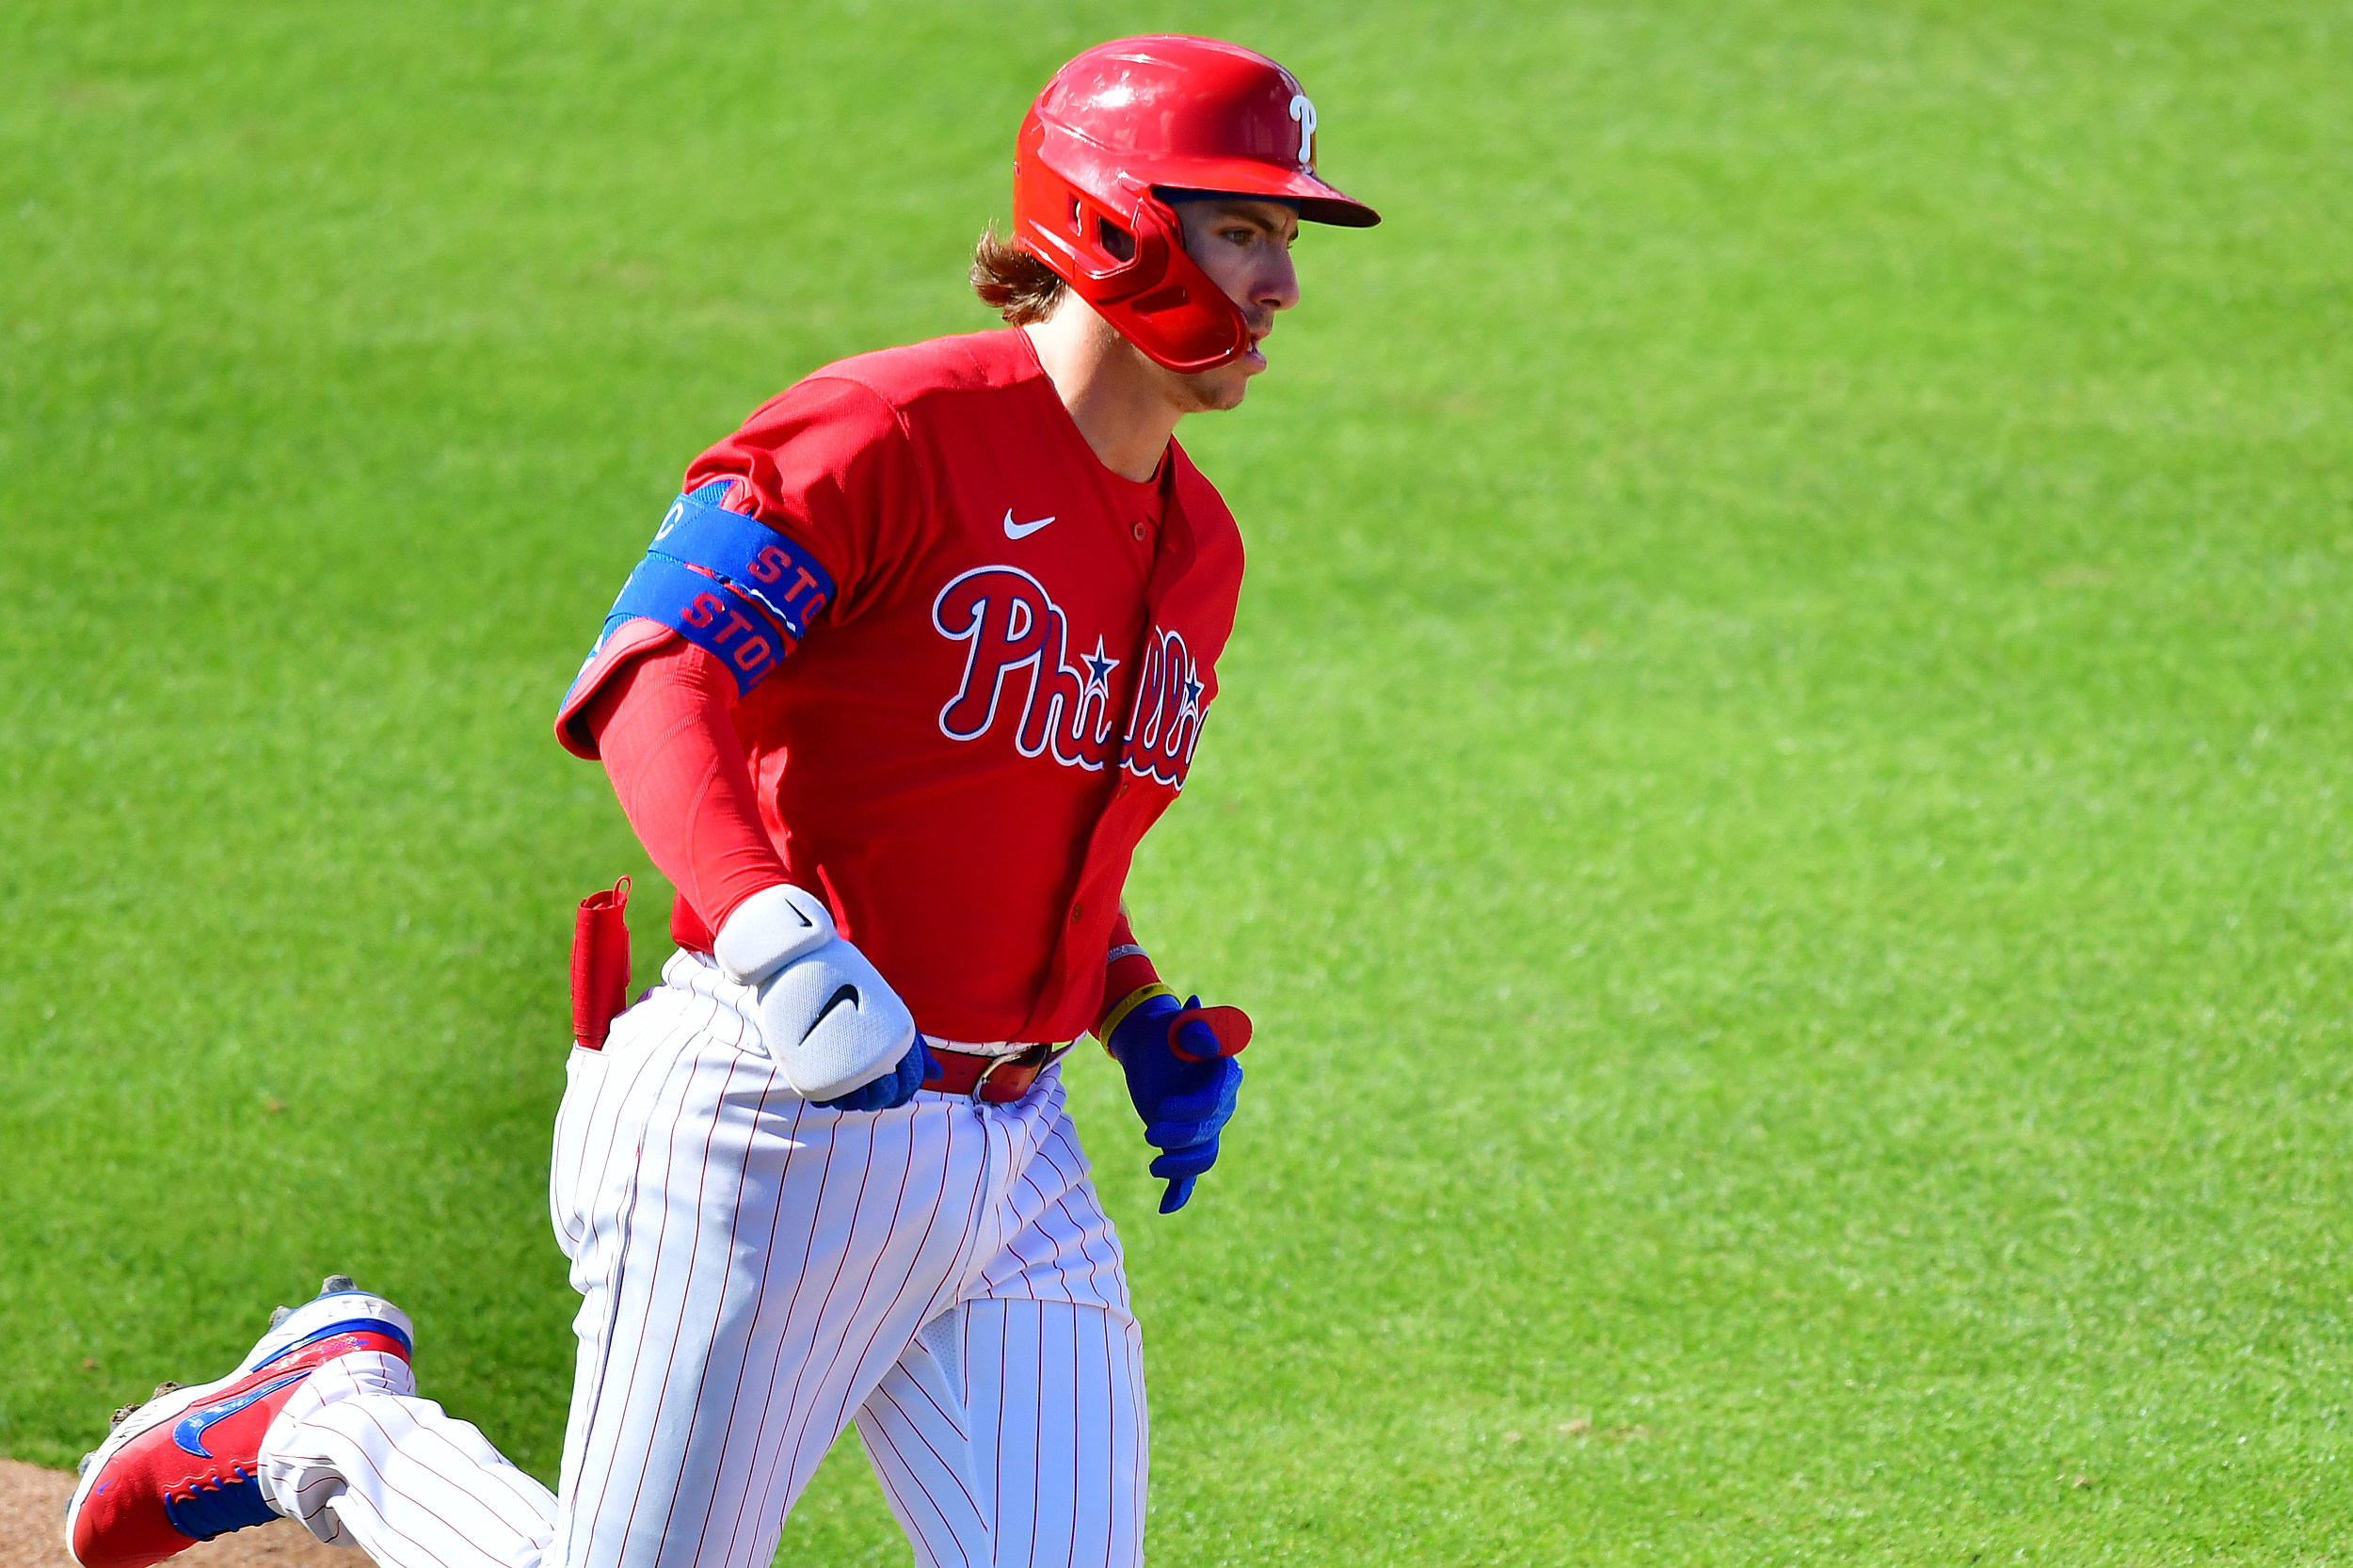 Top Phillies prospect Alec Bohm staying level-headed following